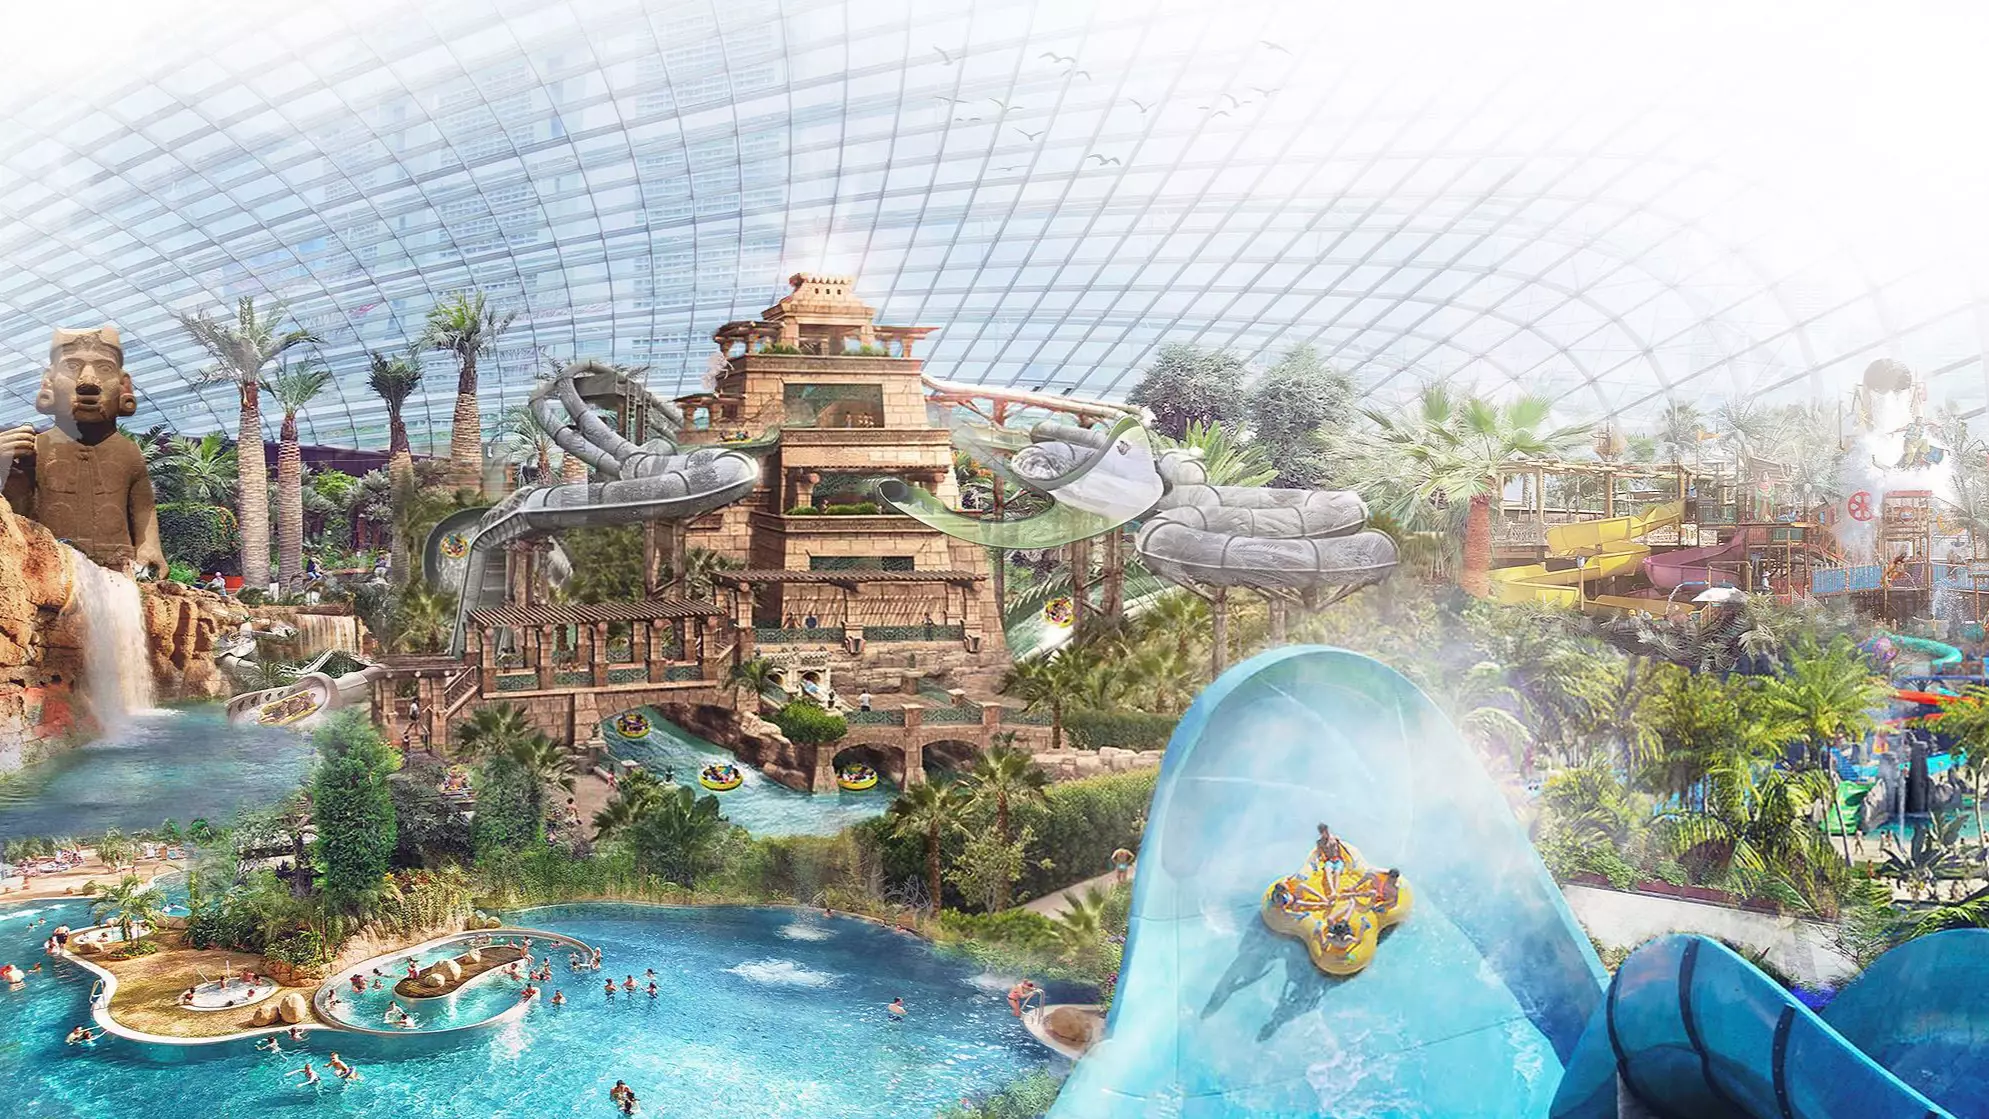 New £75m Water Park To Open In The UK